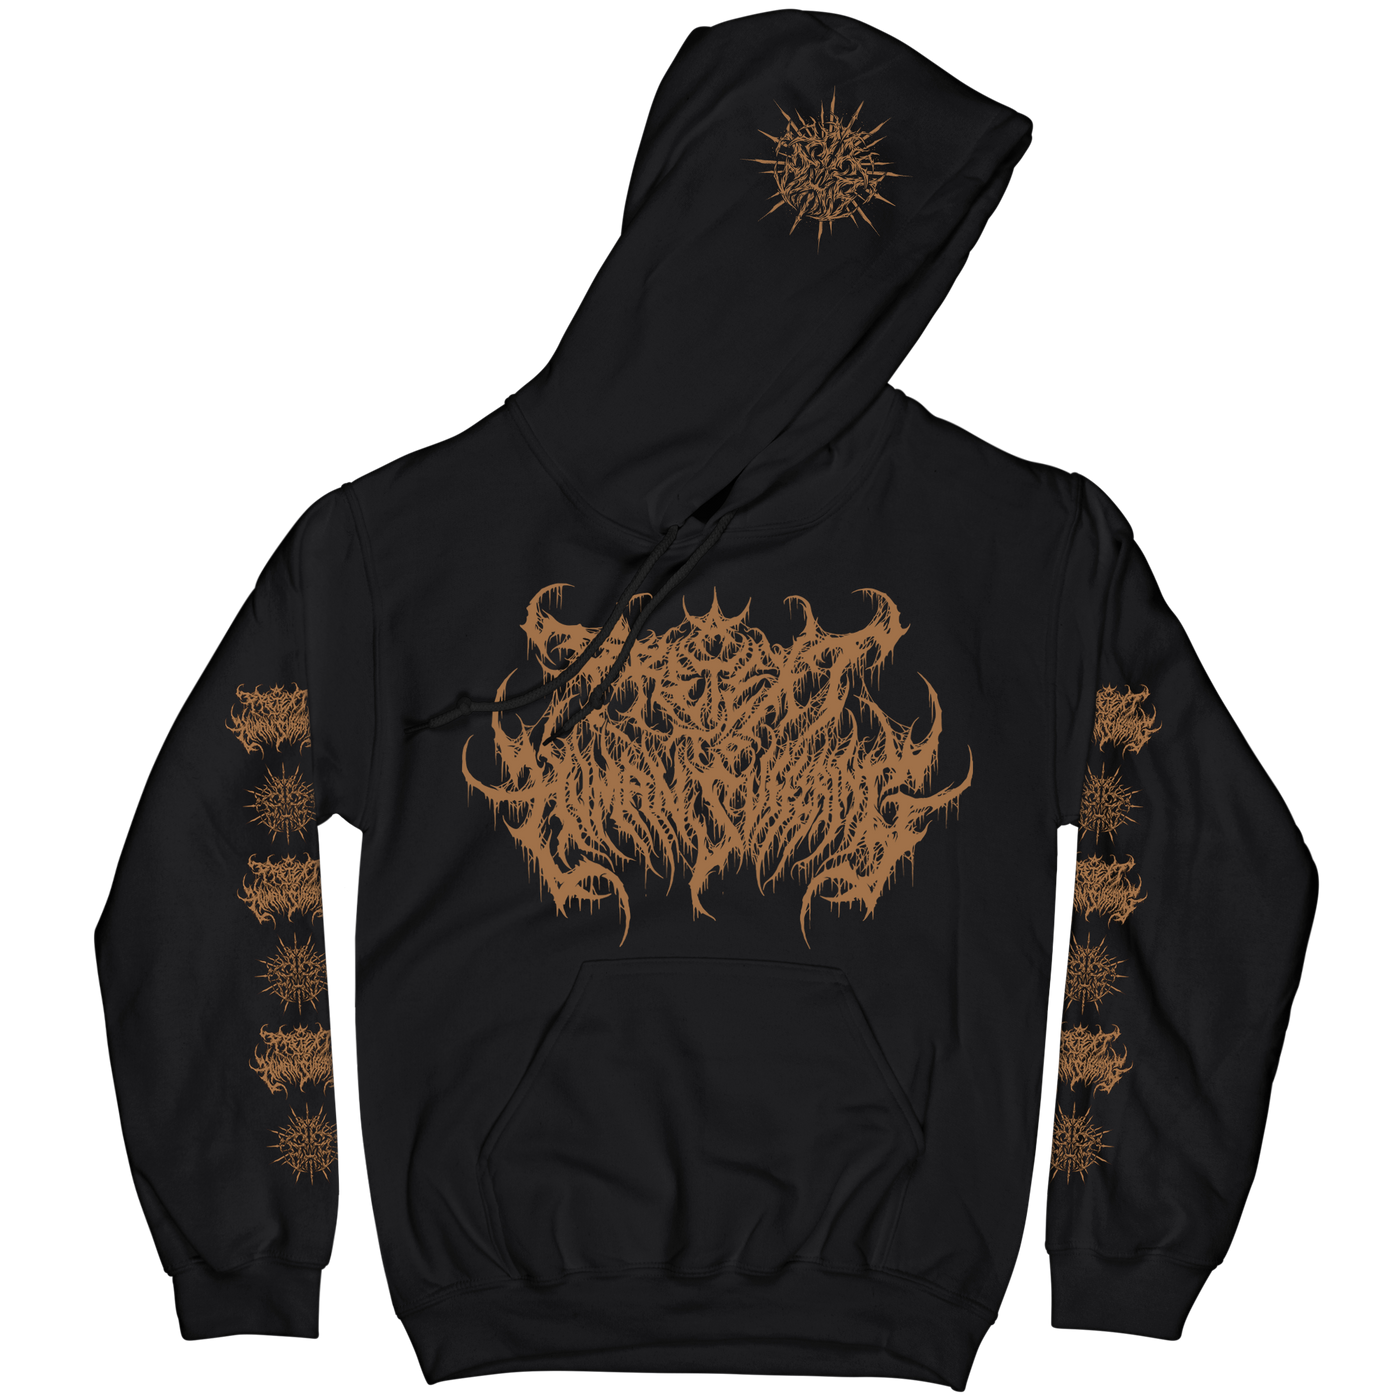 A Pretext To Human Suffering 'Endless Cycle Of Suffering' Hoodie